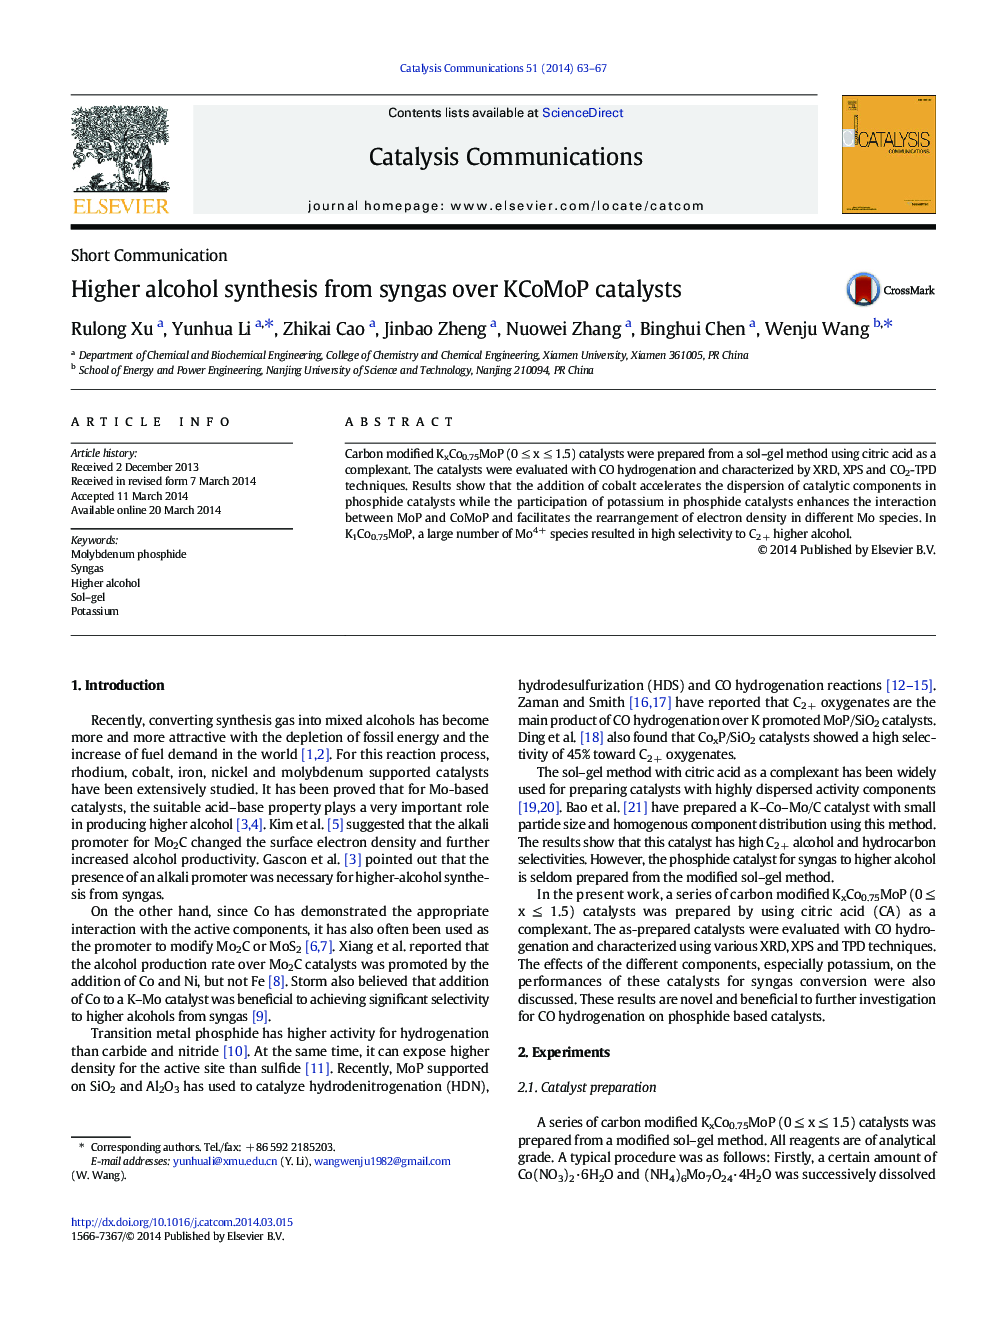 Higher alcohol synthesis from syngas over KCoMoP catalysts